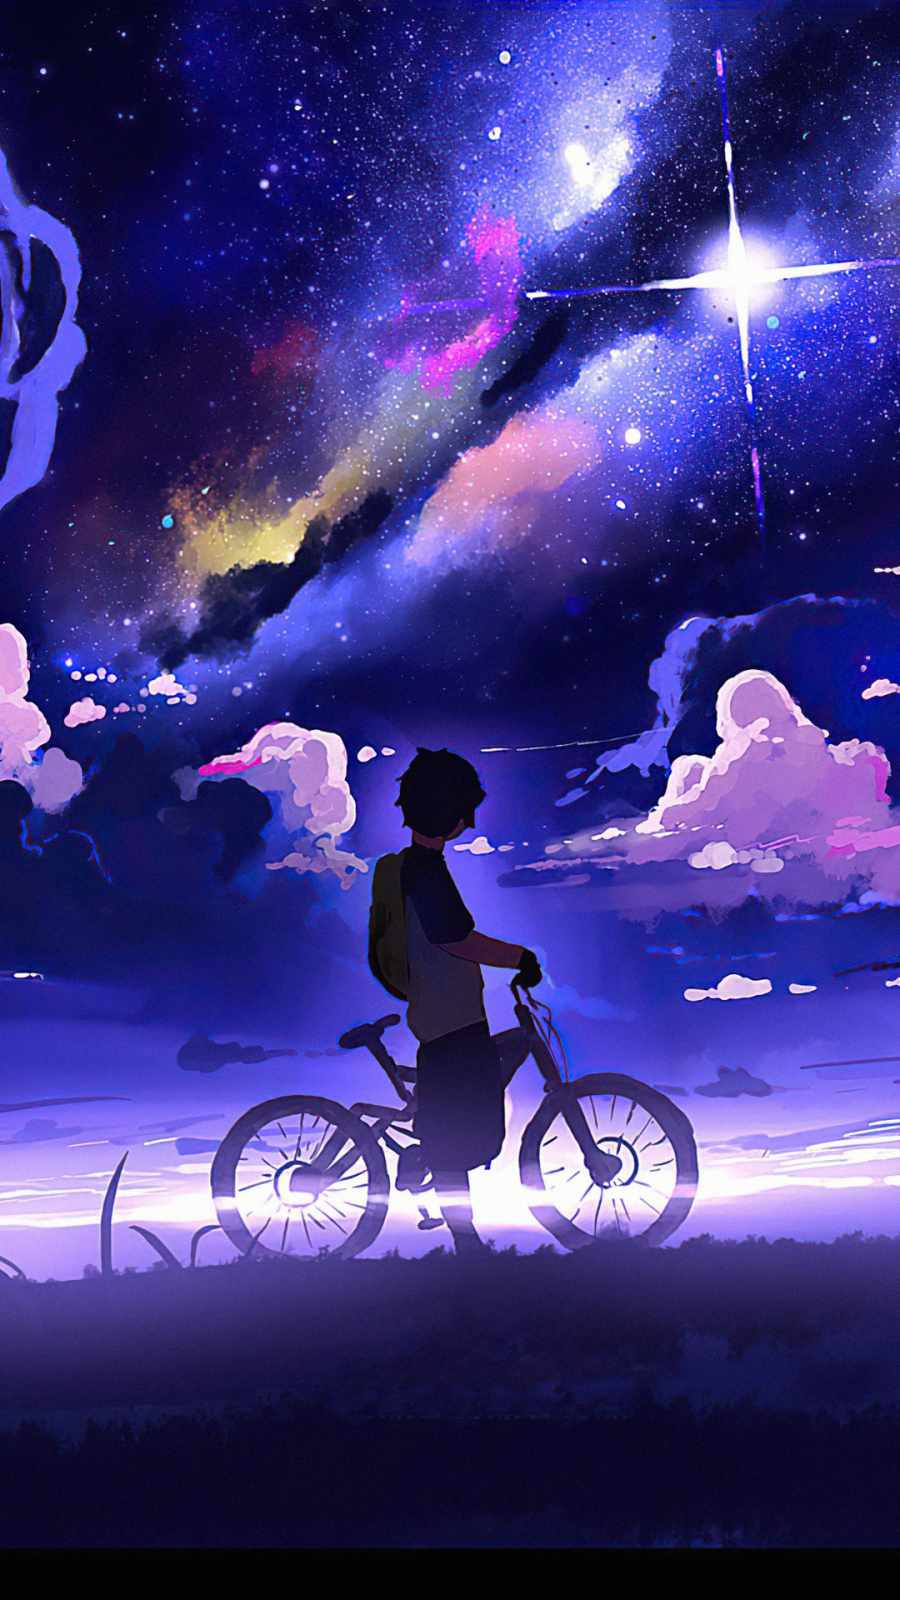 Boy With Bike Starry Evening IPhone Wallpaper - IPhone Wallpapers : iPhone  Wallpapers